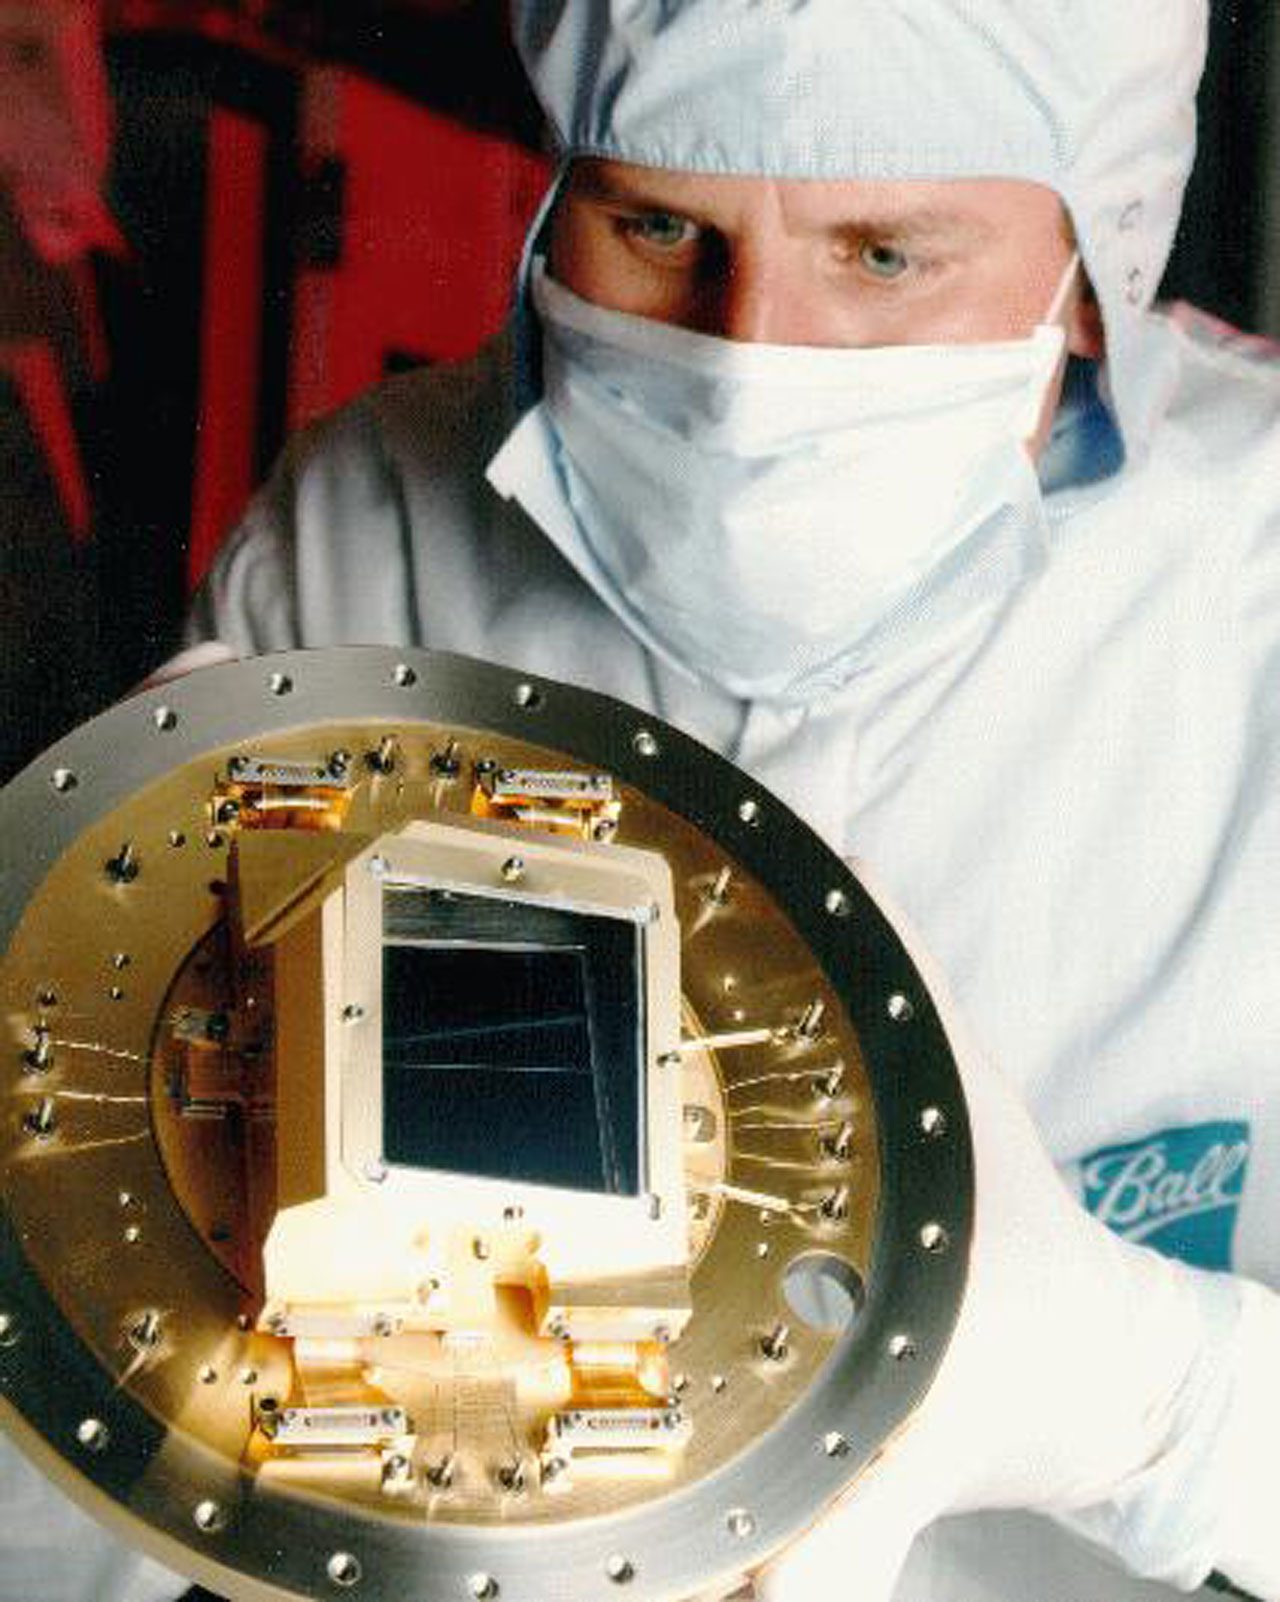 A look into one of ACS's most delicate and crucial parts - the CCD camera.